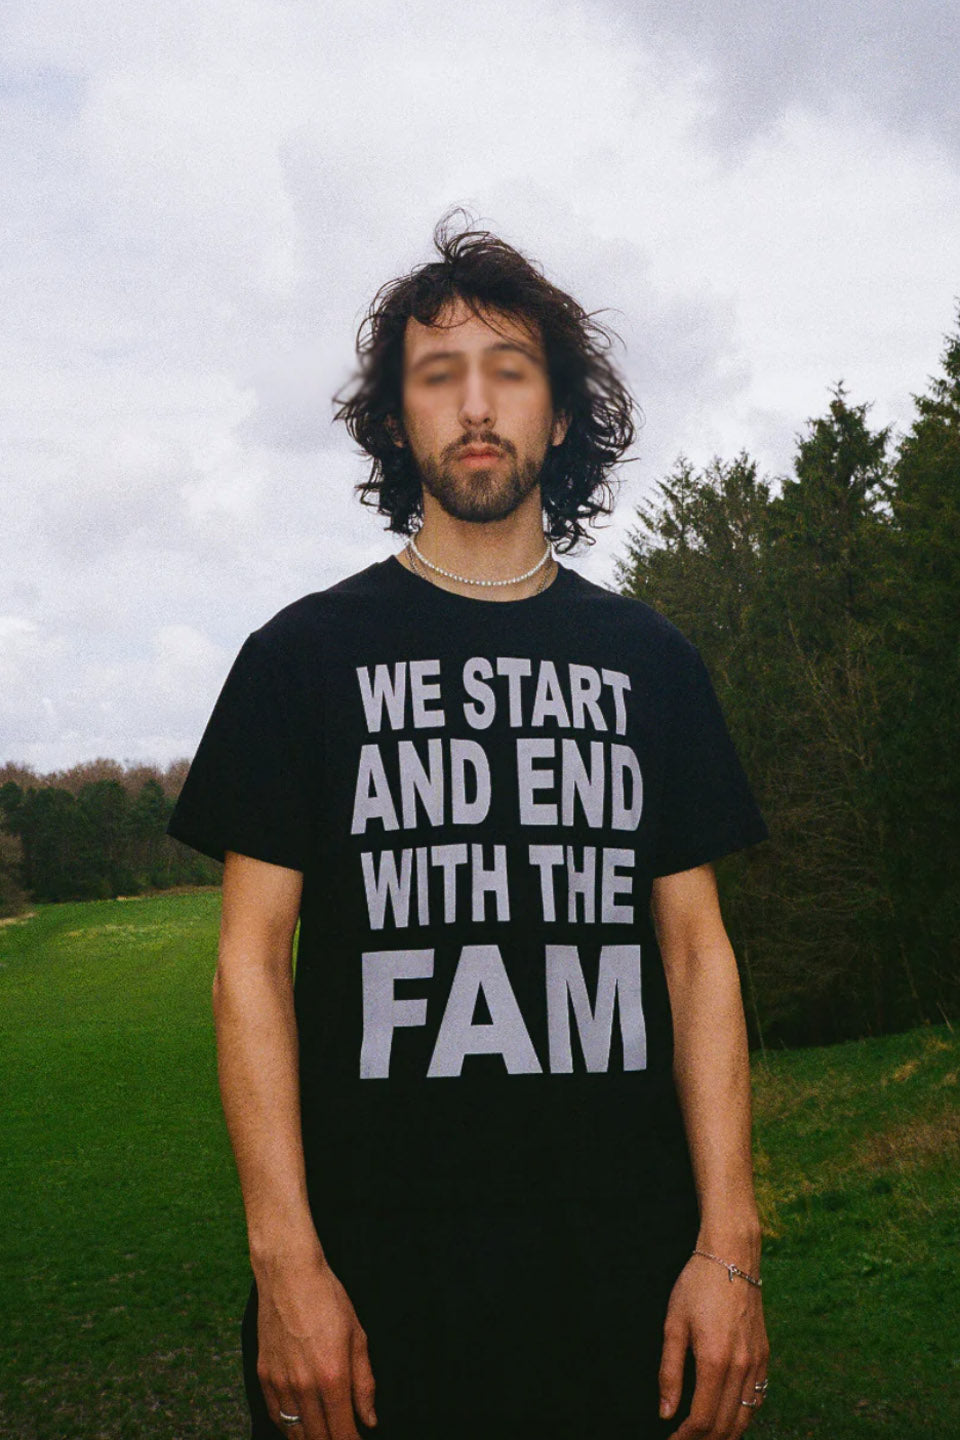 We Start And End With The Fam Tee